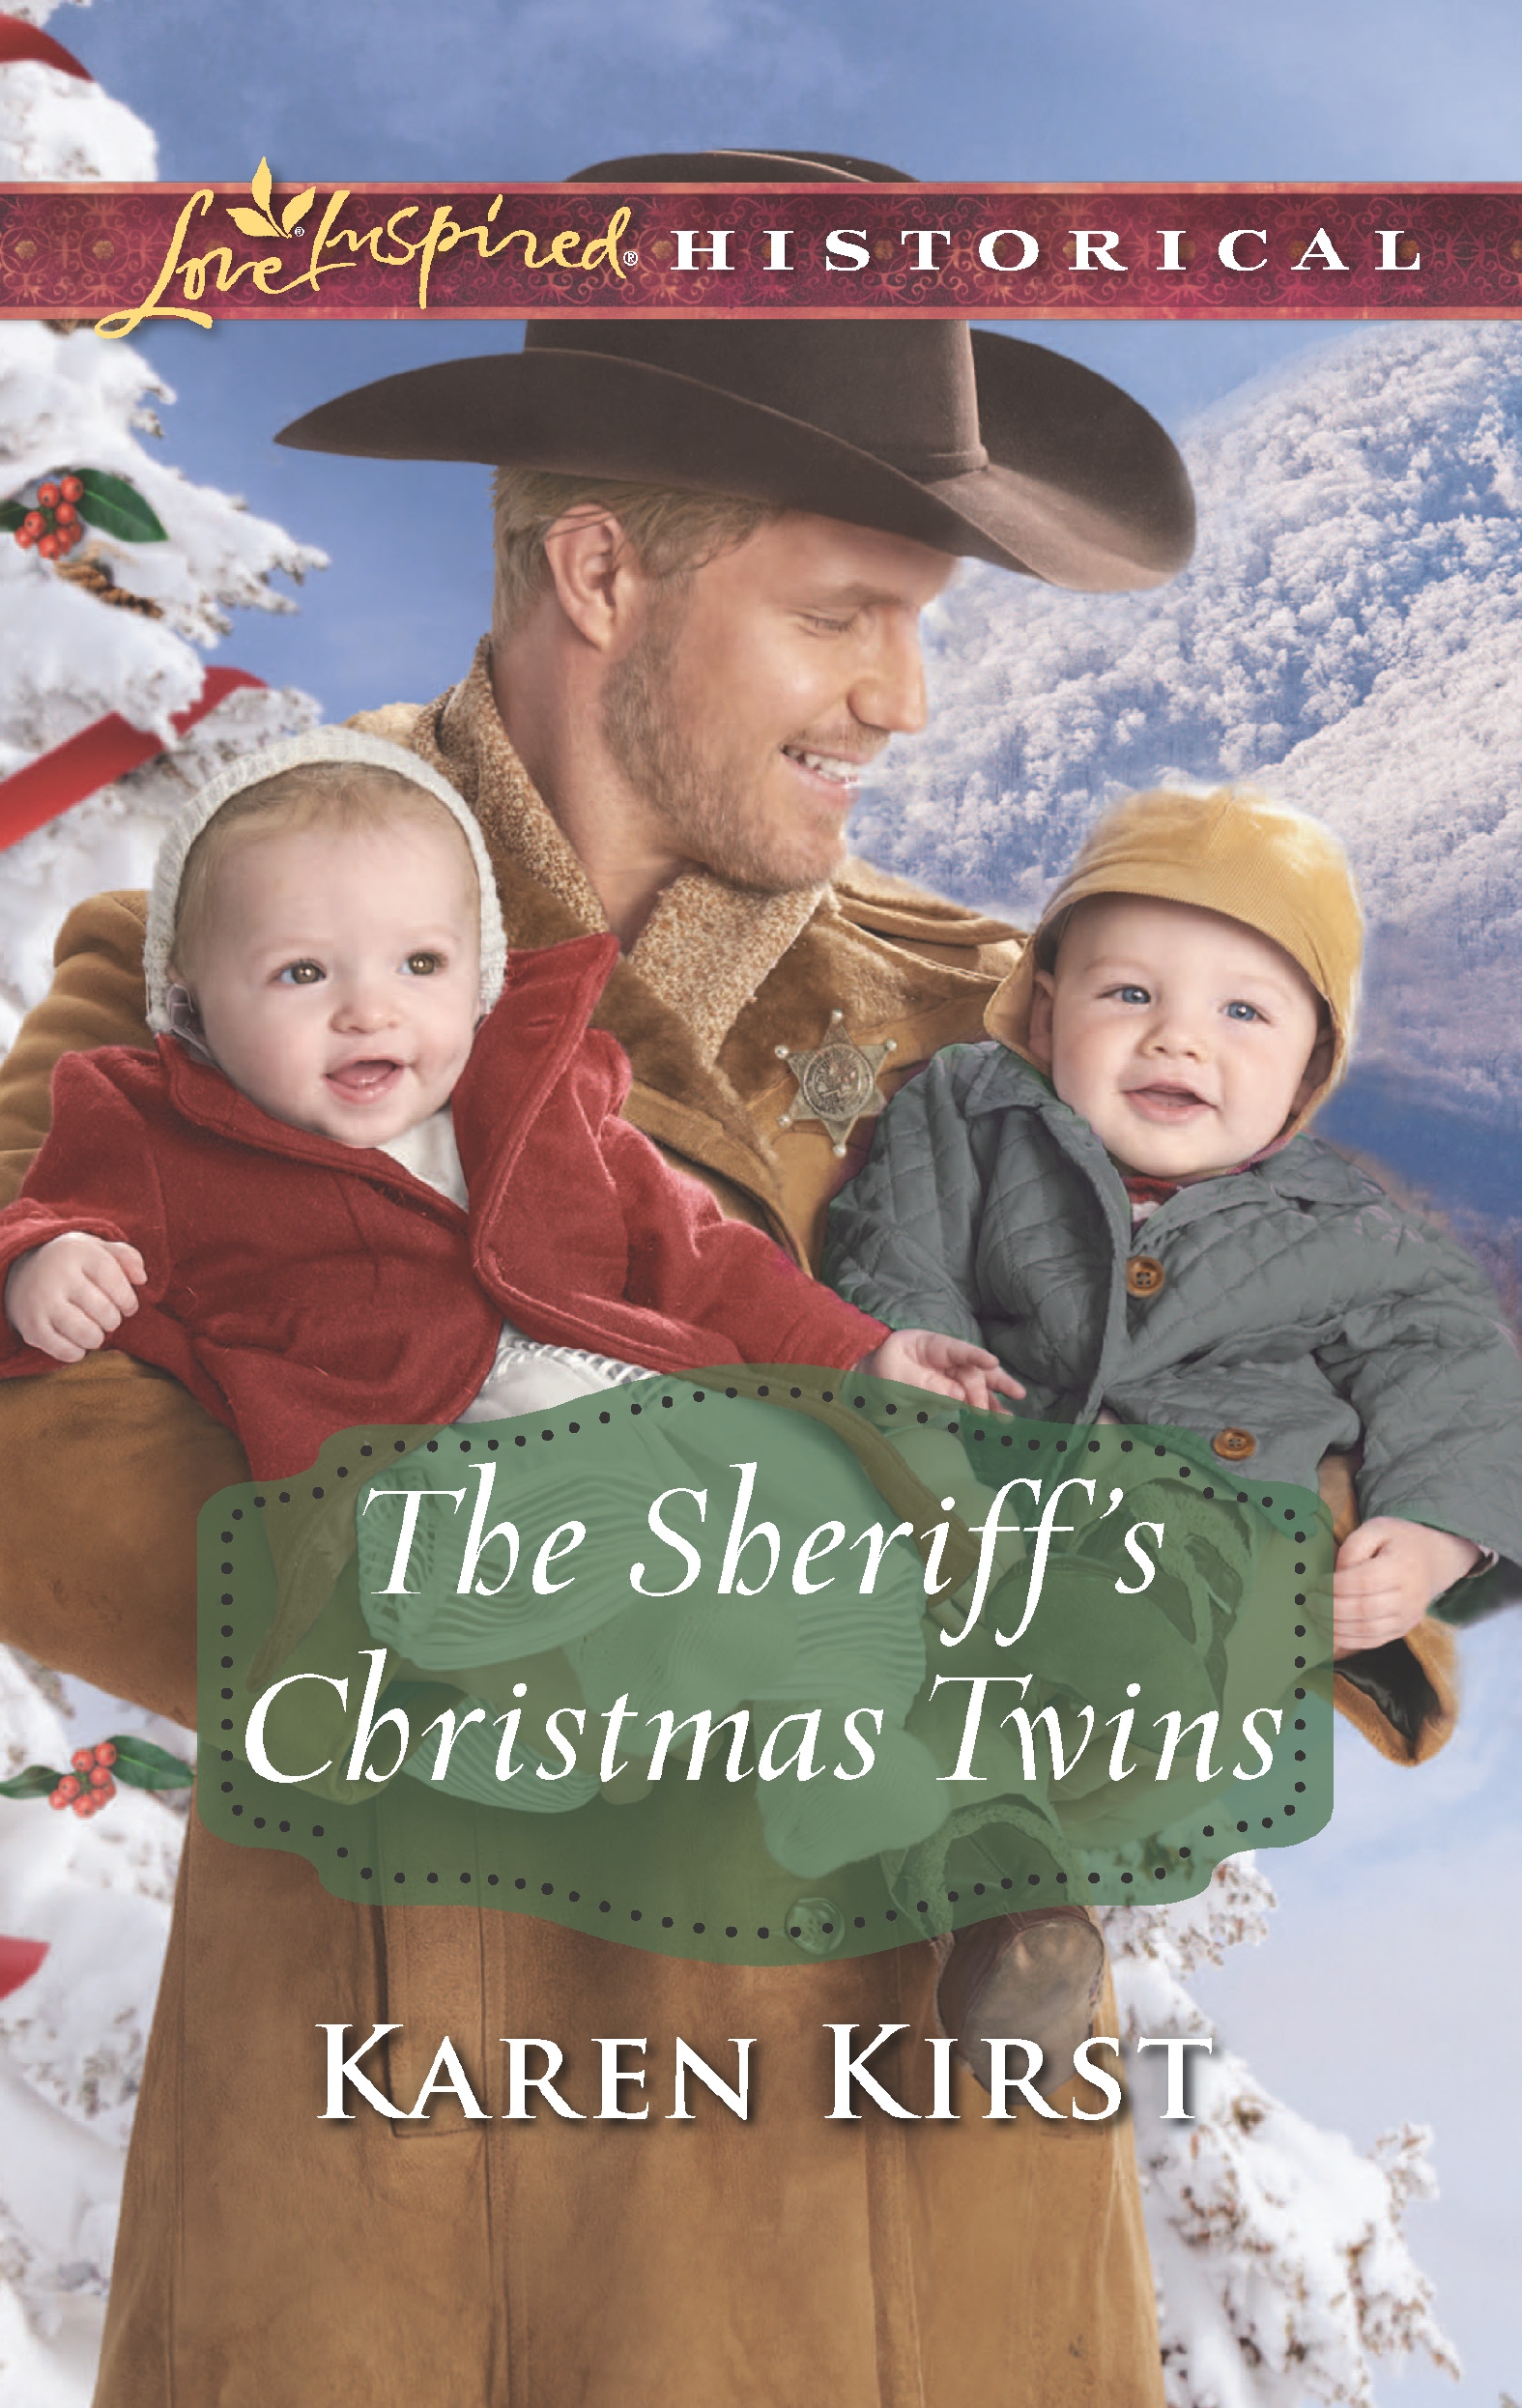 The Sheriff's Christmas Twins (2016) by Karen Kirst